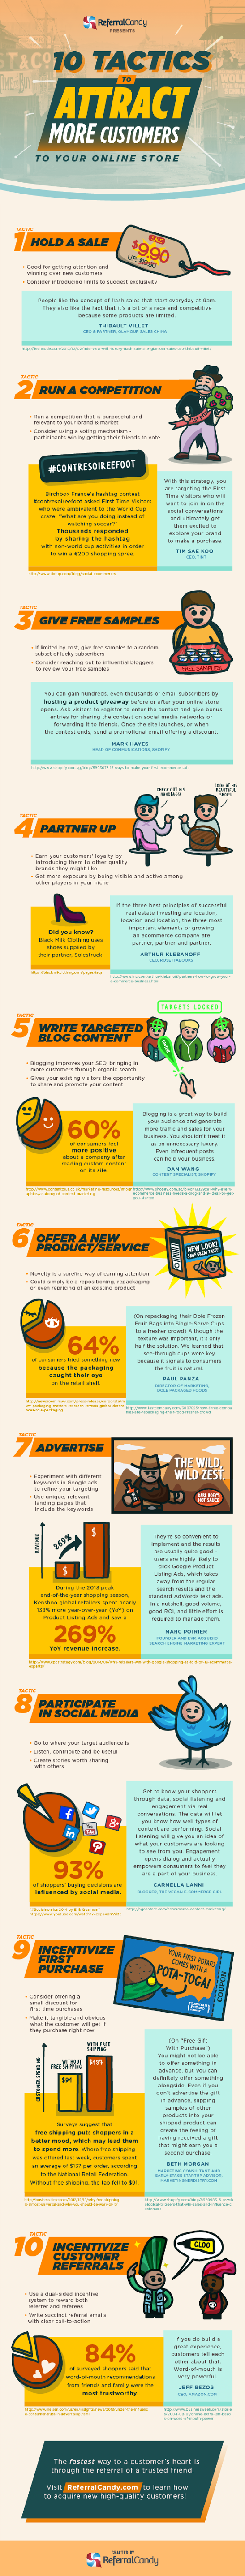 10 Tactics To Attract More Customers To Your Online Store #infographic